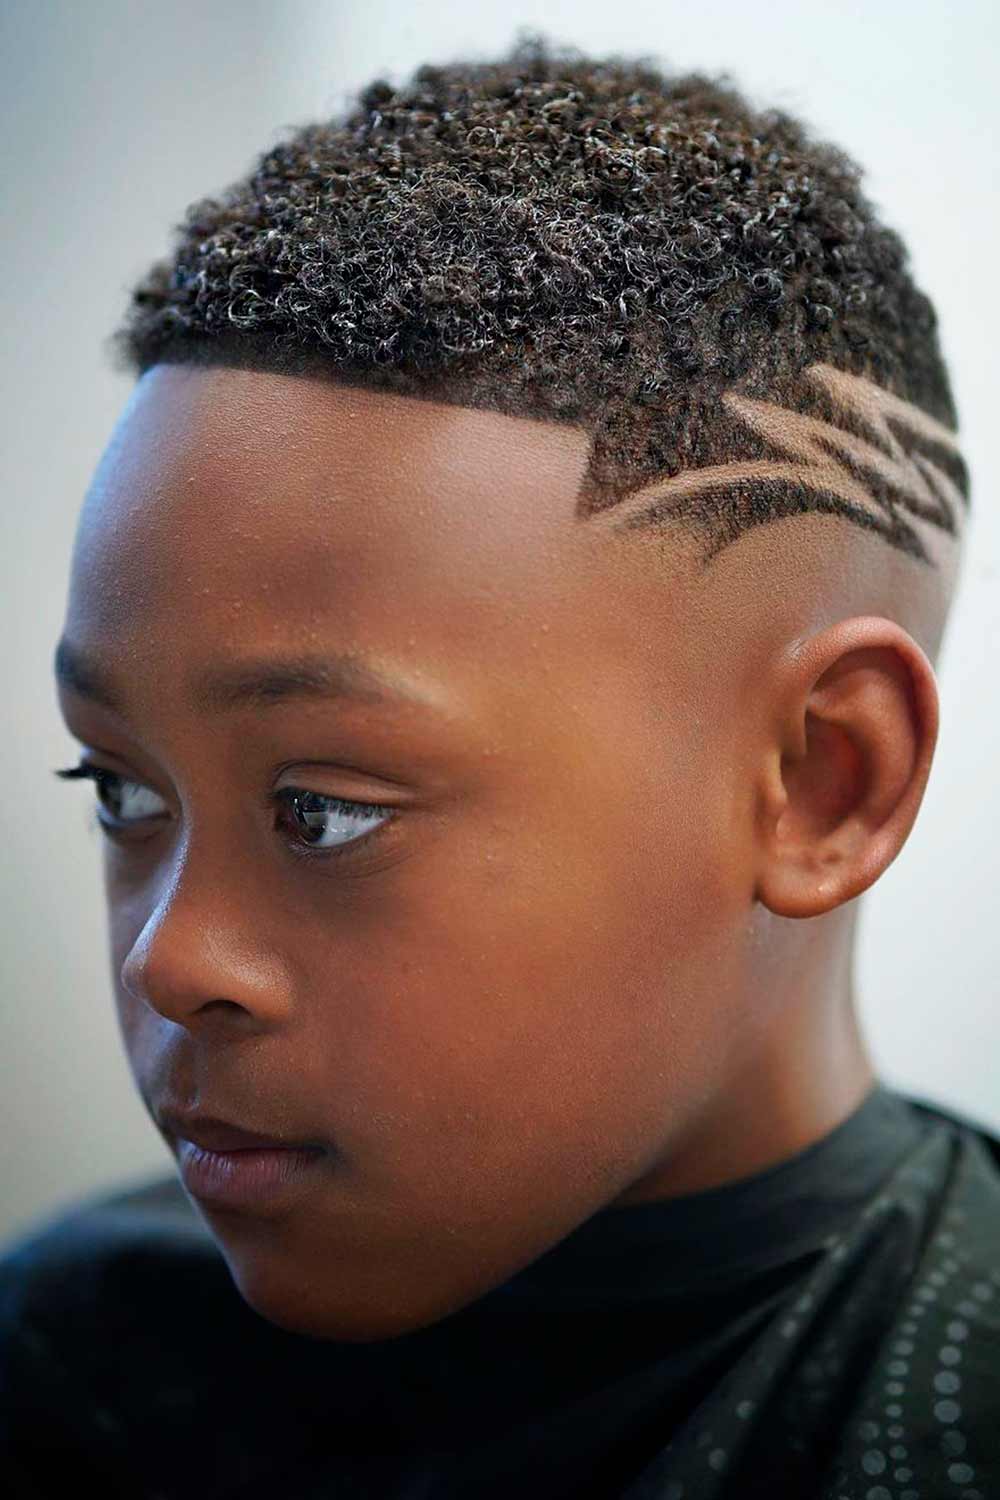 Hairstyles and Haircuts. Barbarian style. - Toddler Boys Fade Undercut with  Turtle Design #barbarianstyle #undercut #undercutboys #undercutdesign  #undercuthairstyle #undercutnation #undercuts #undercutsforboys #hairstyle # haircut Find More Impressive ...